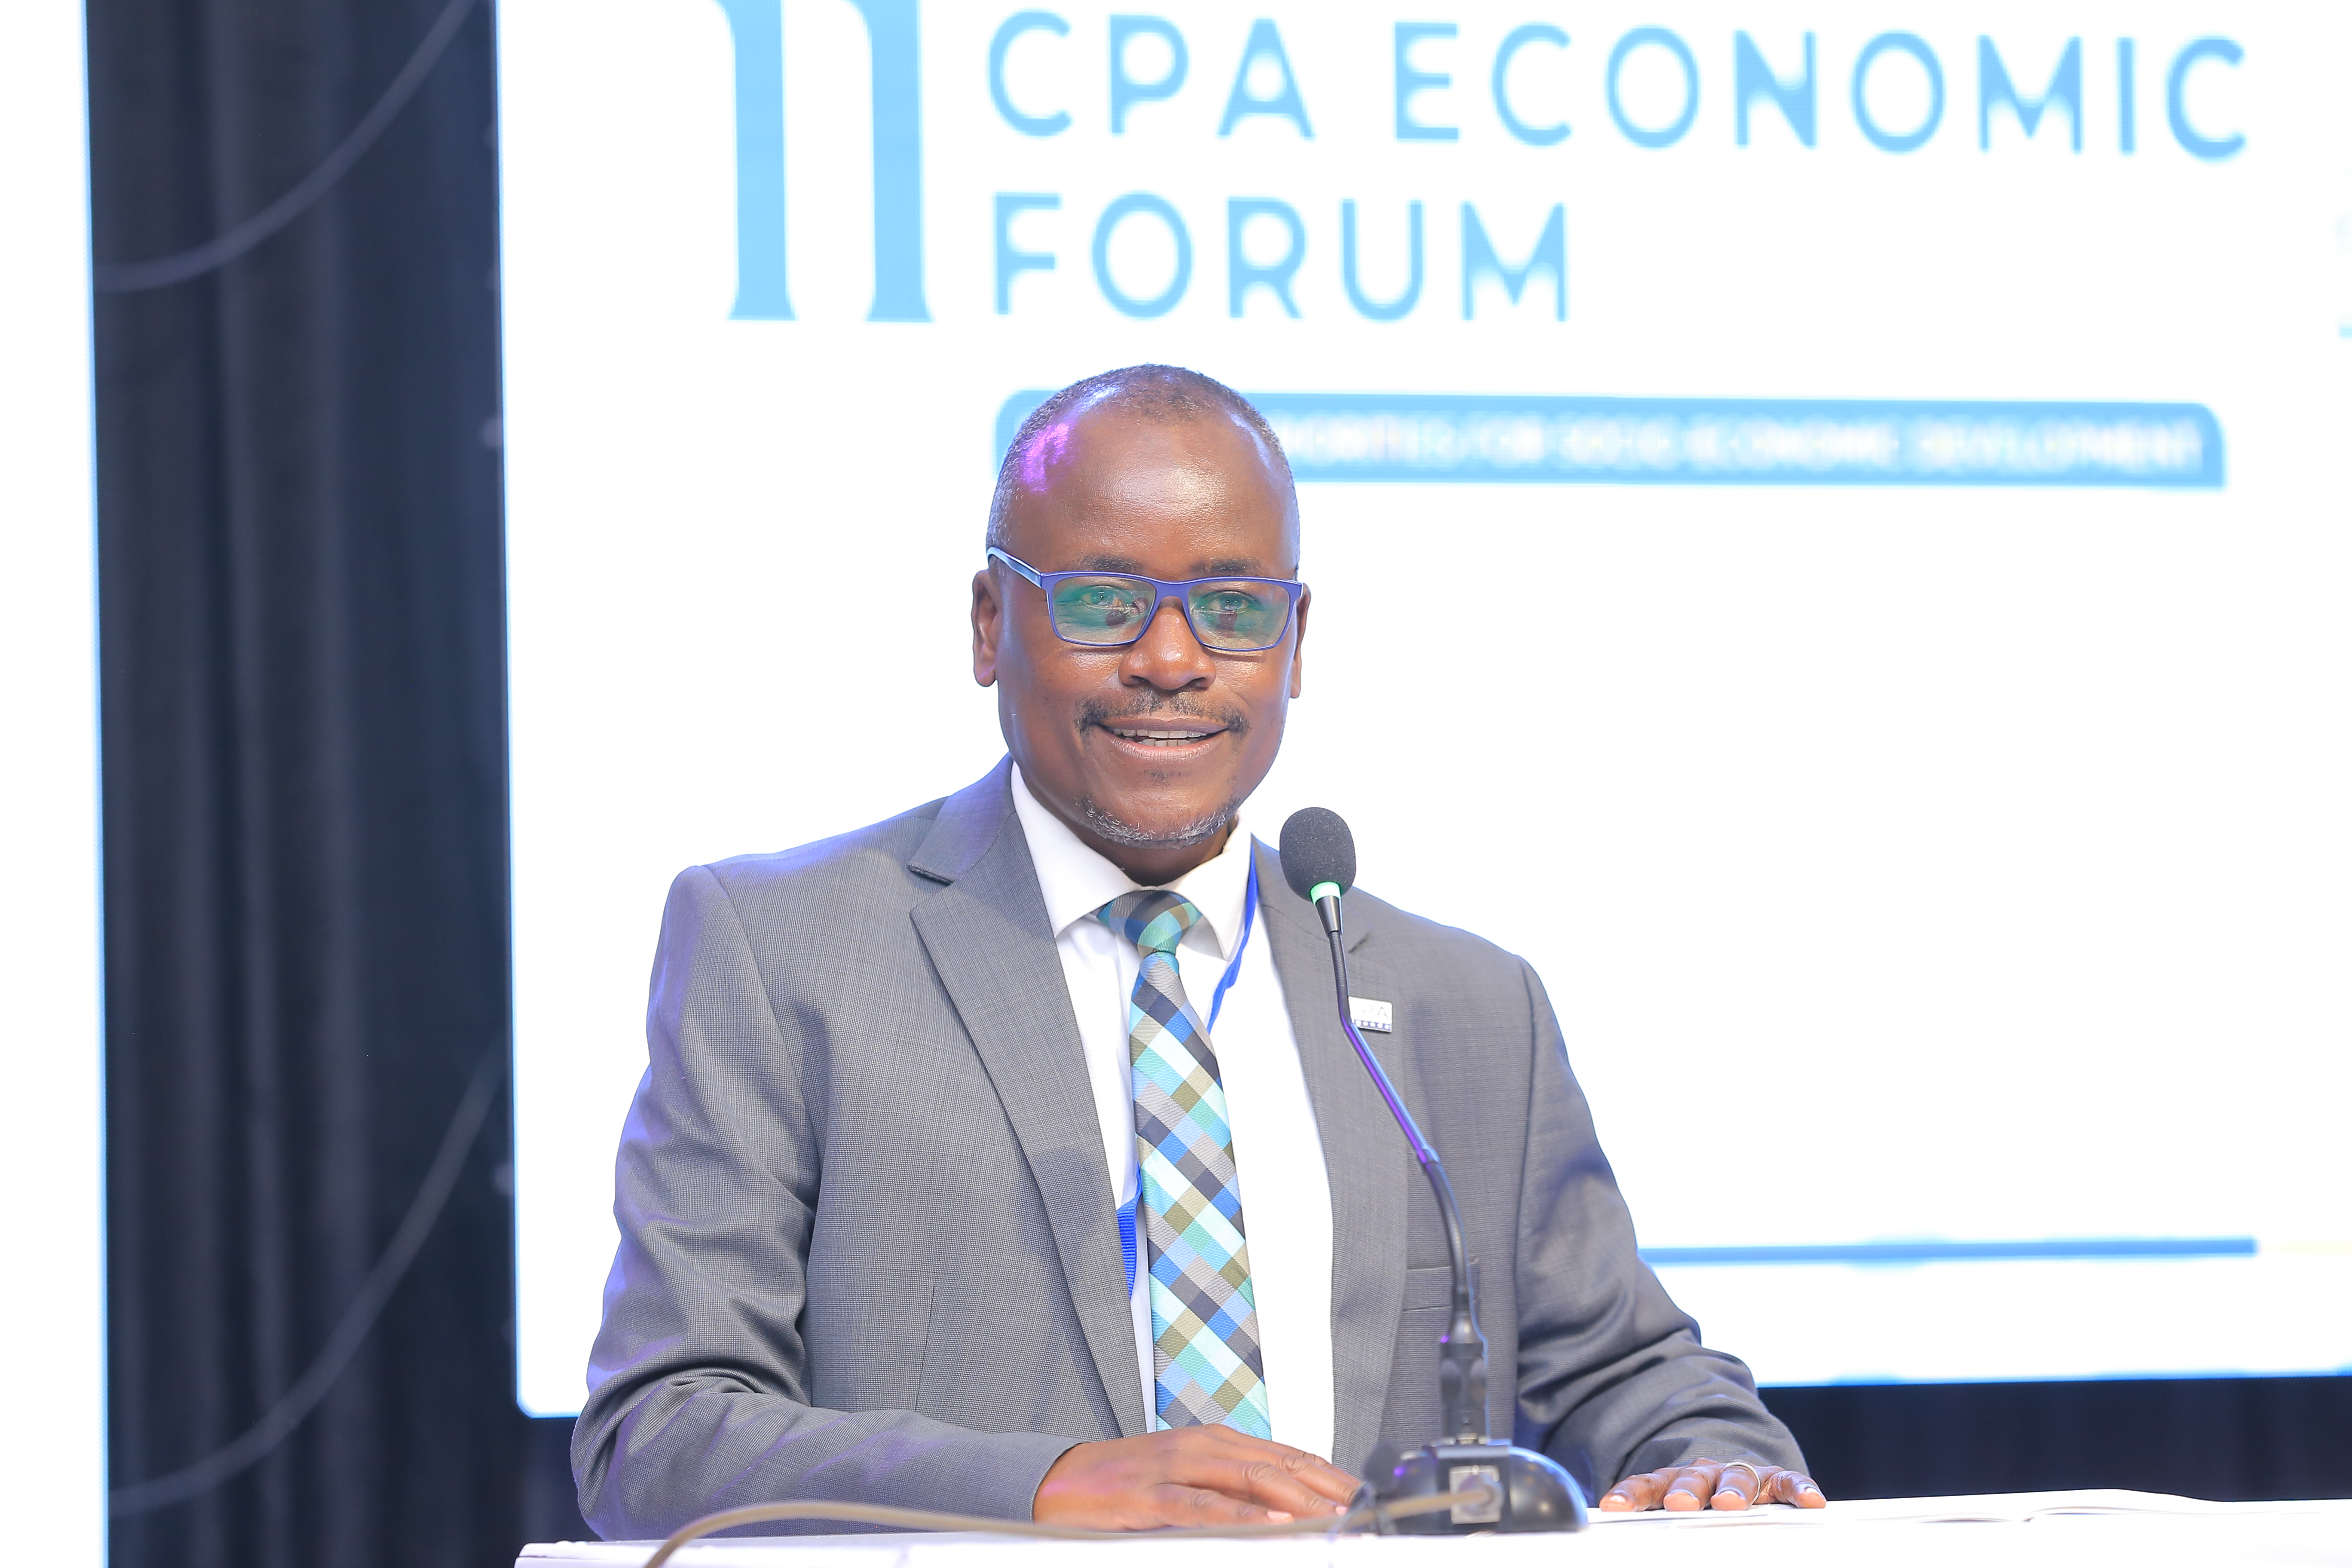 ICPAU Vice President CPA Ronald Mutumba chairing the 1st Session of the 11th CPA Economic Forum